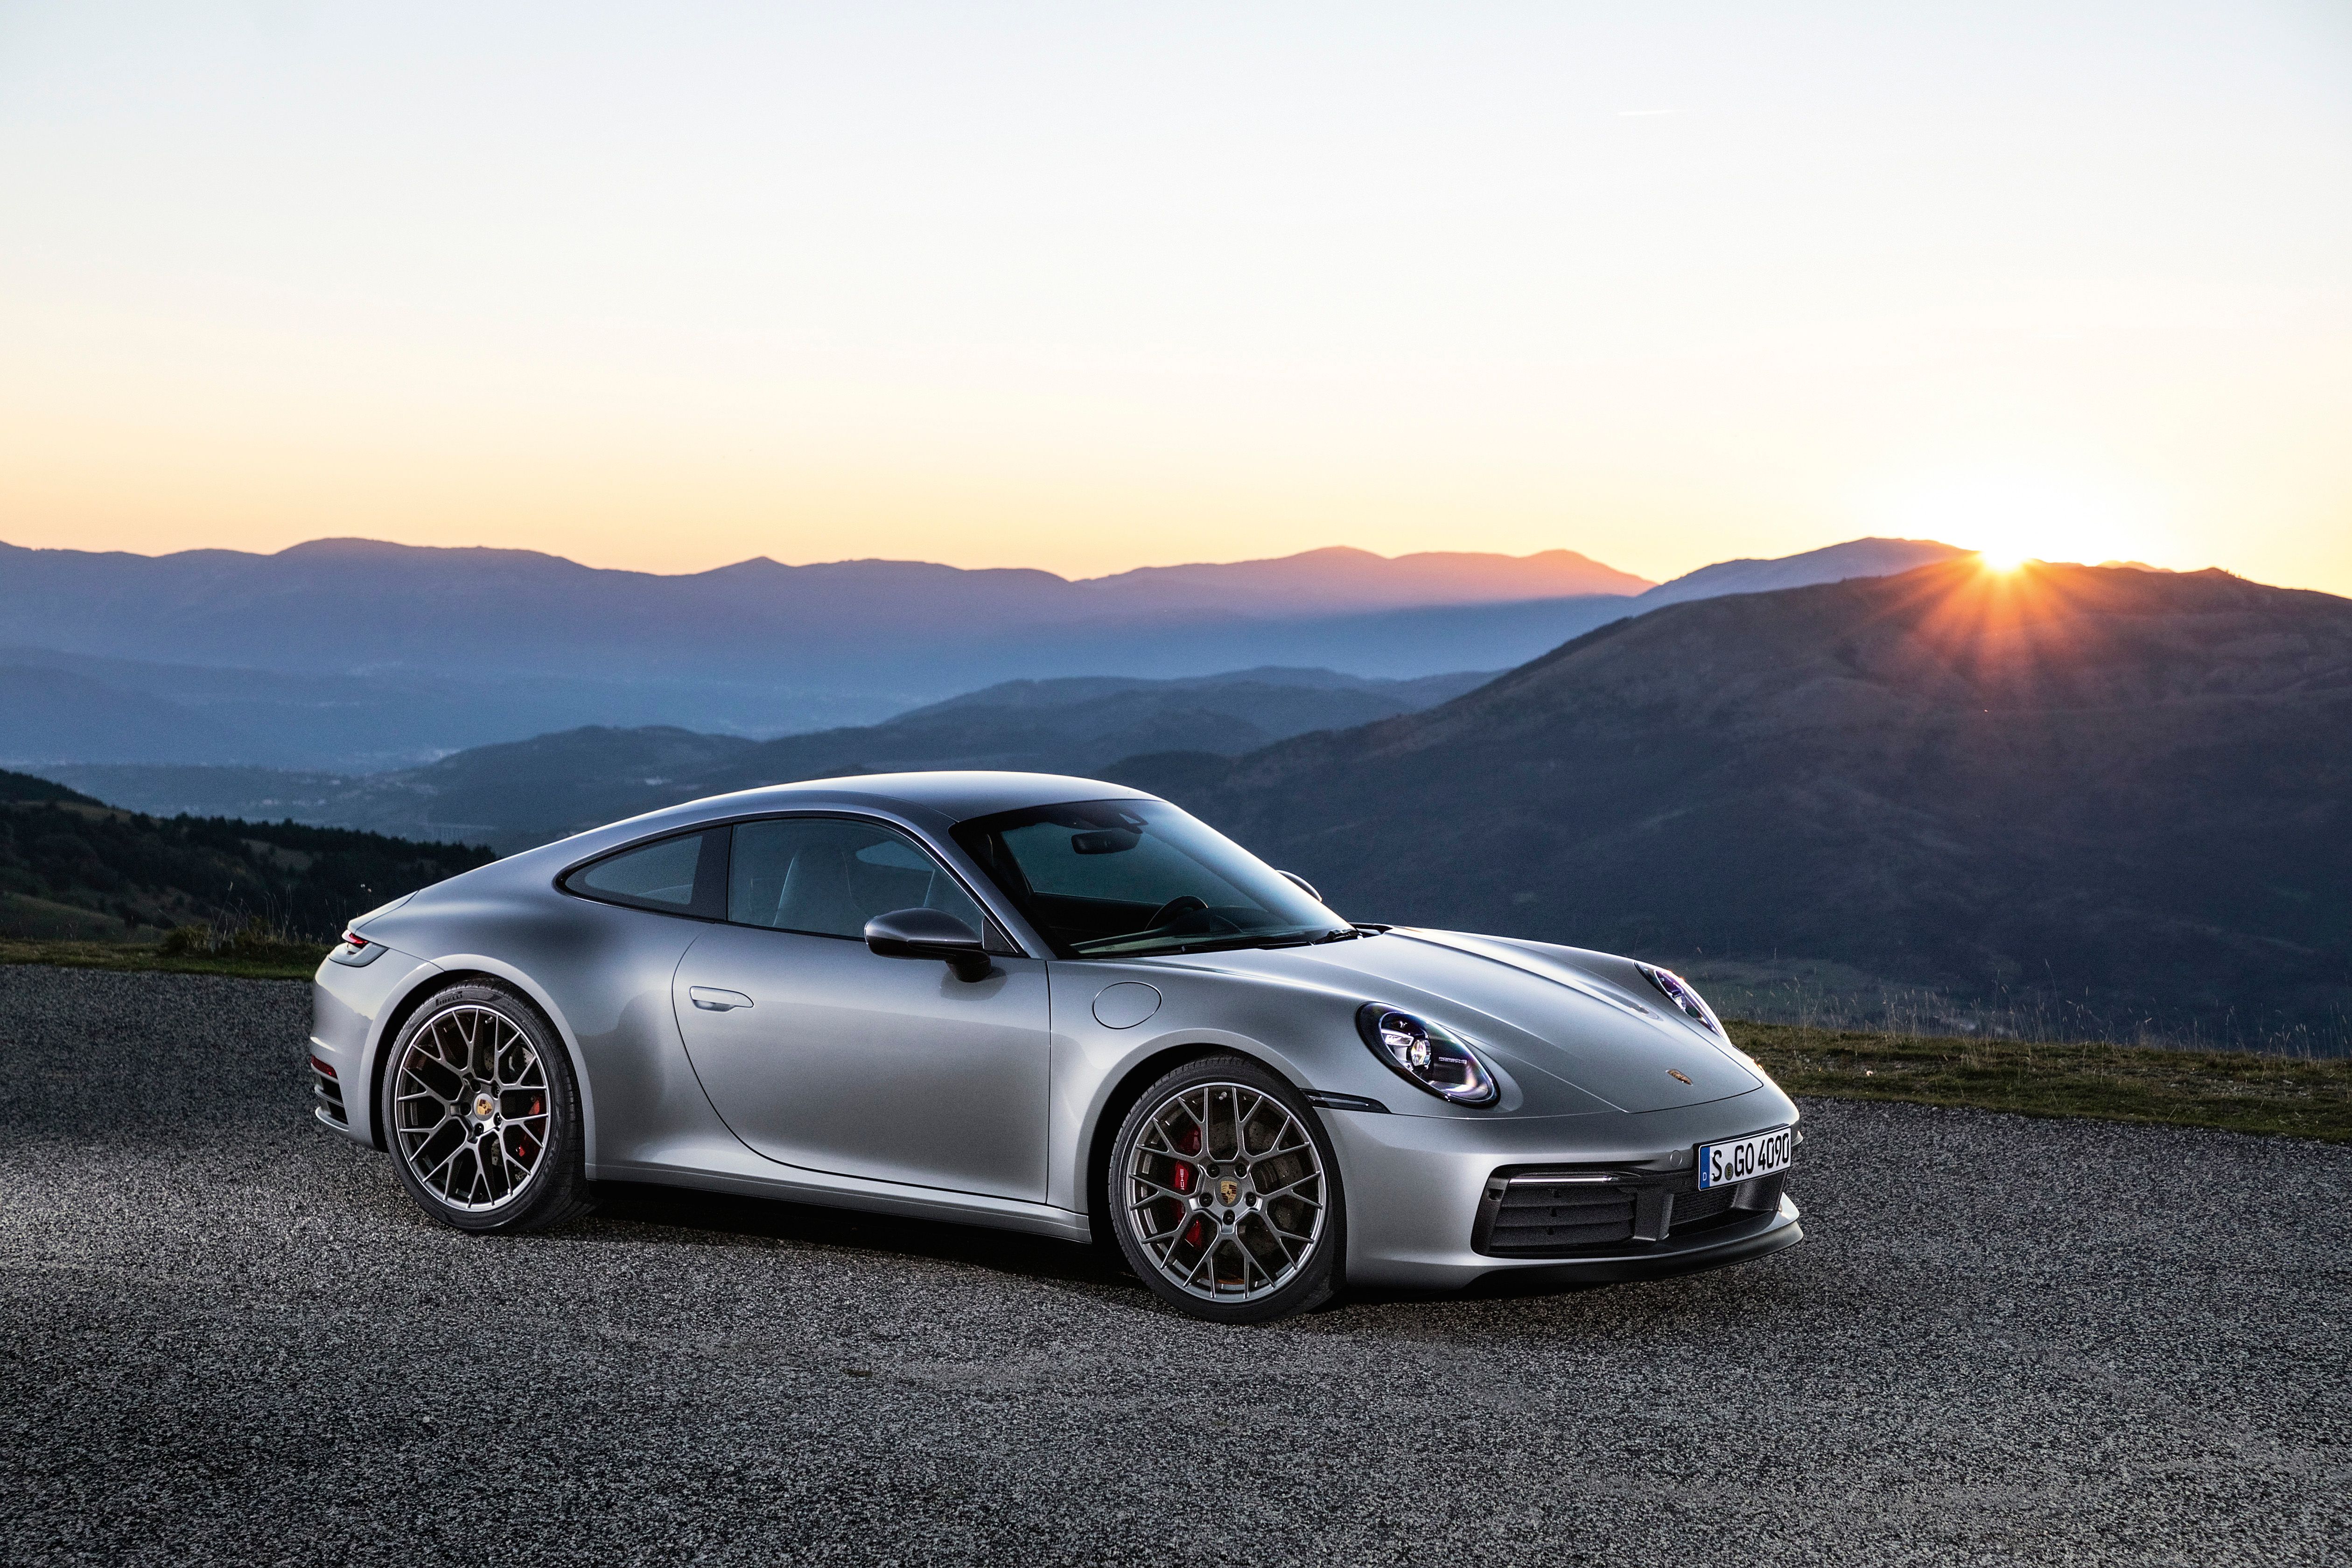 The All-New Porsche 911 Proves That The More Things Change, The More They Stay The Same